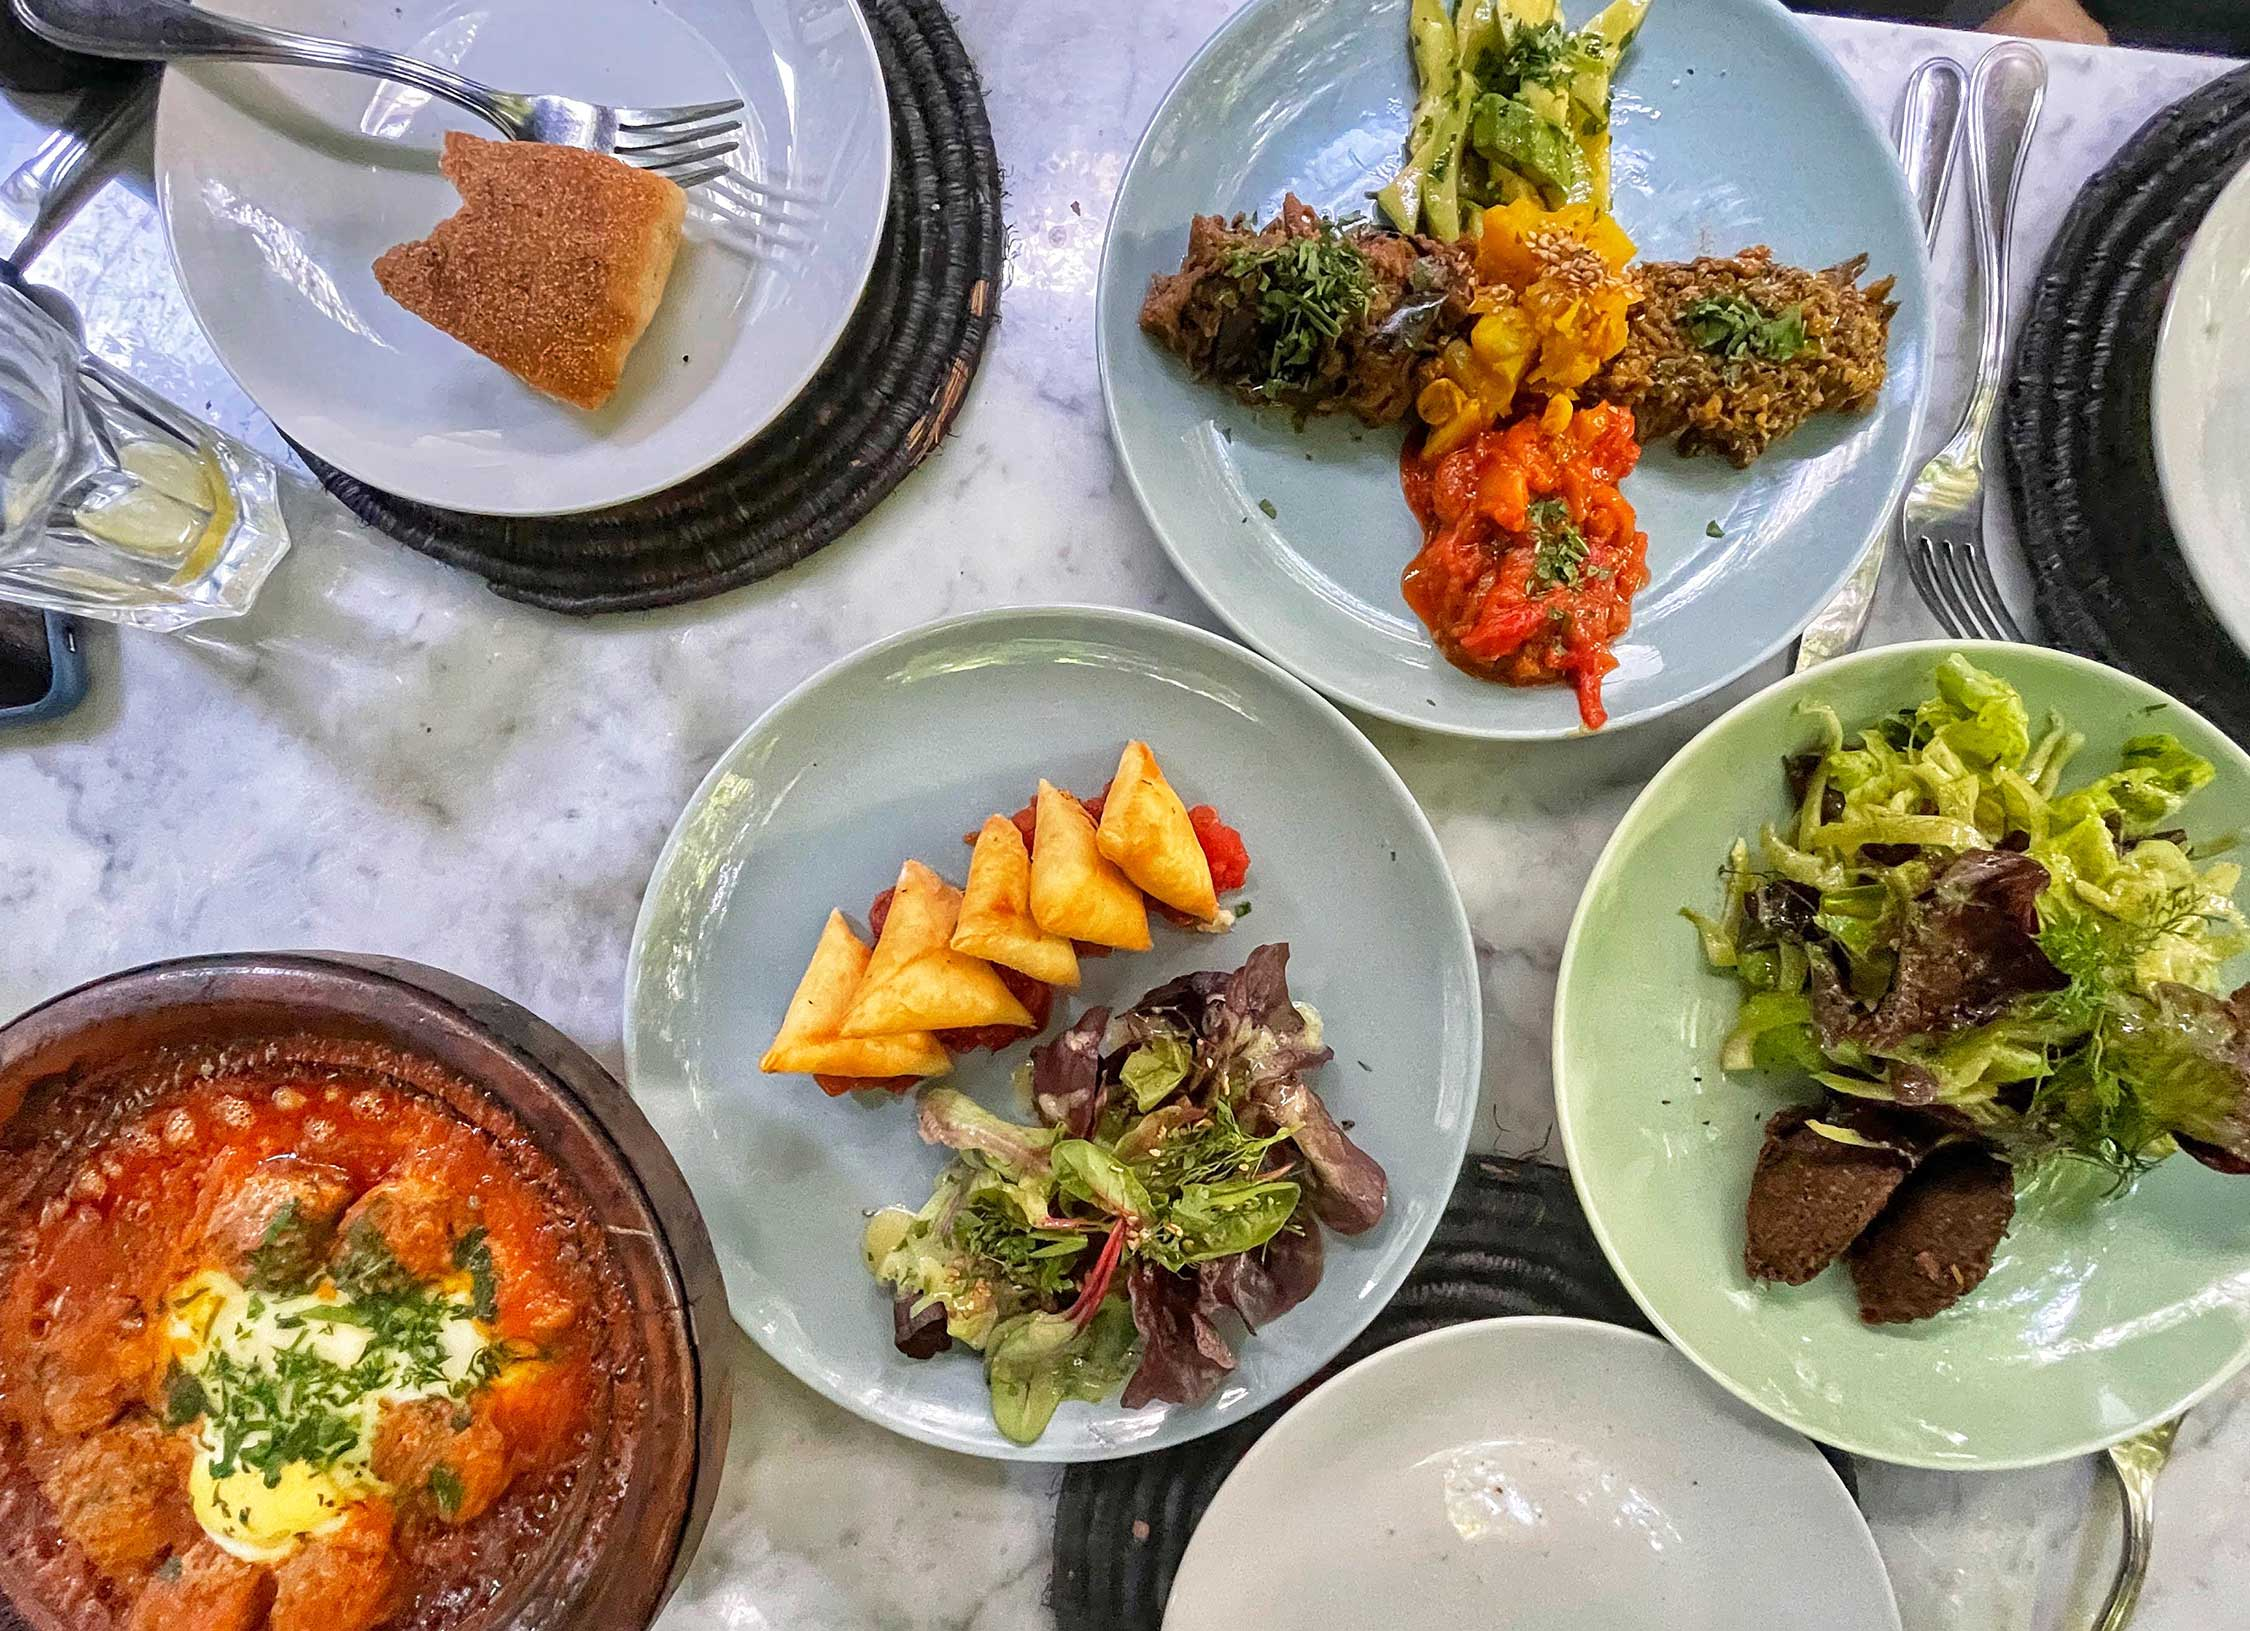 A colorful Moroccan table with traditional Moroccan foods